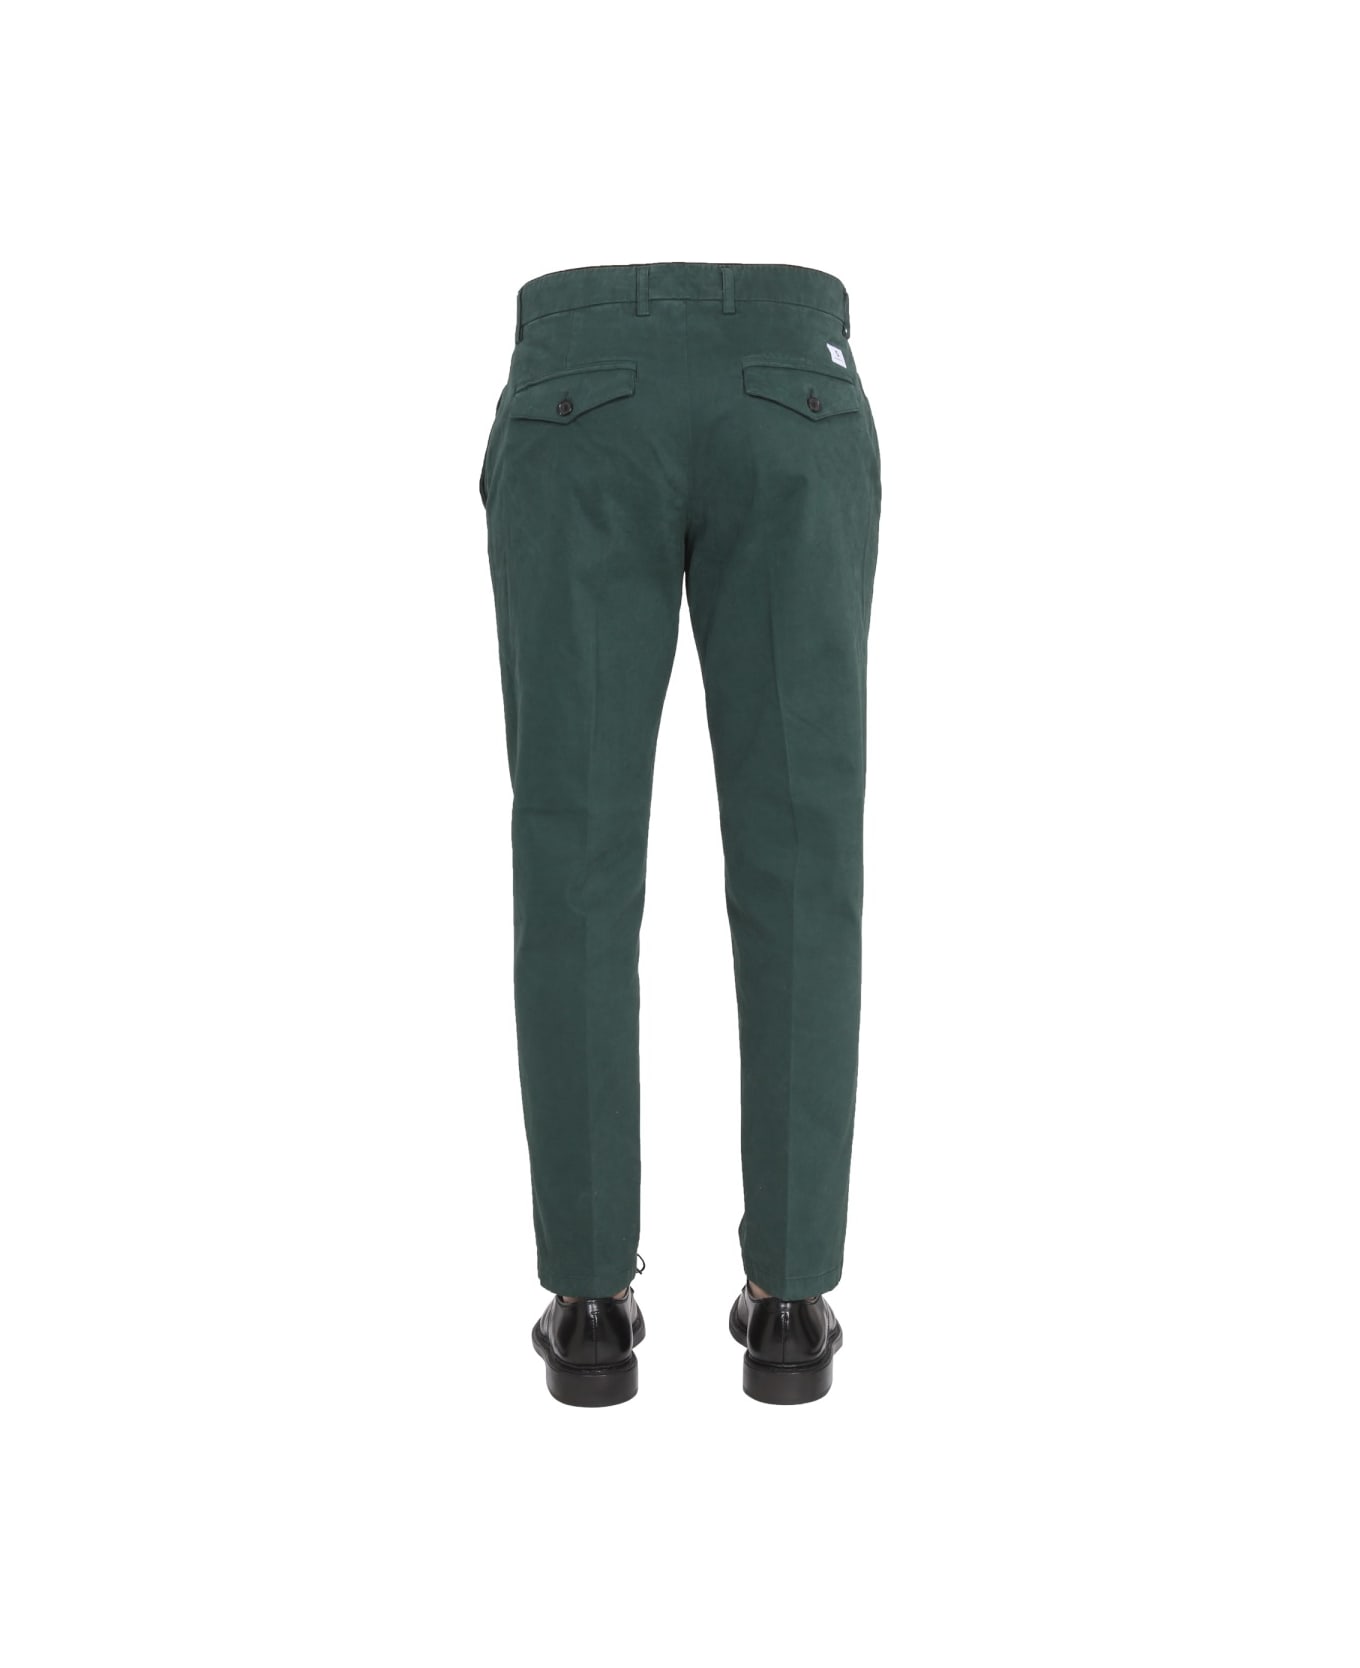 Department Five Setter Chino Pants - GREEN ボトムス